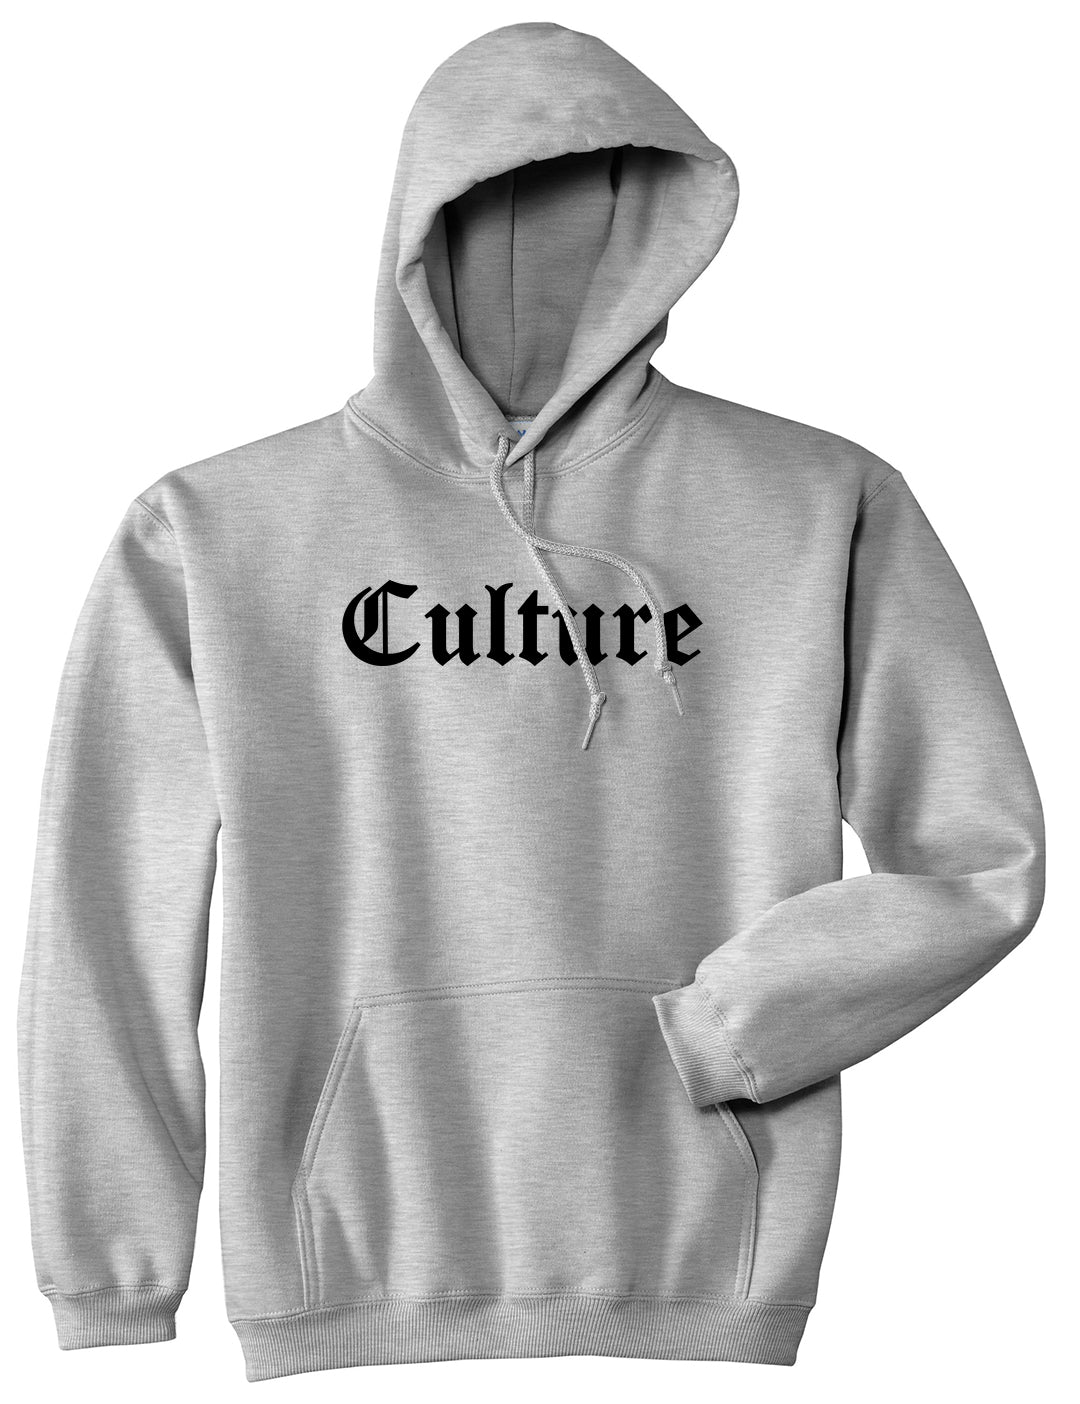 Culture Gothic Font Grey Pullover Hoodie by Kings Of NY